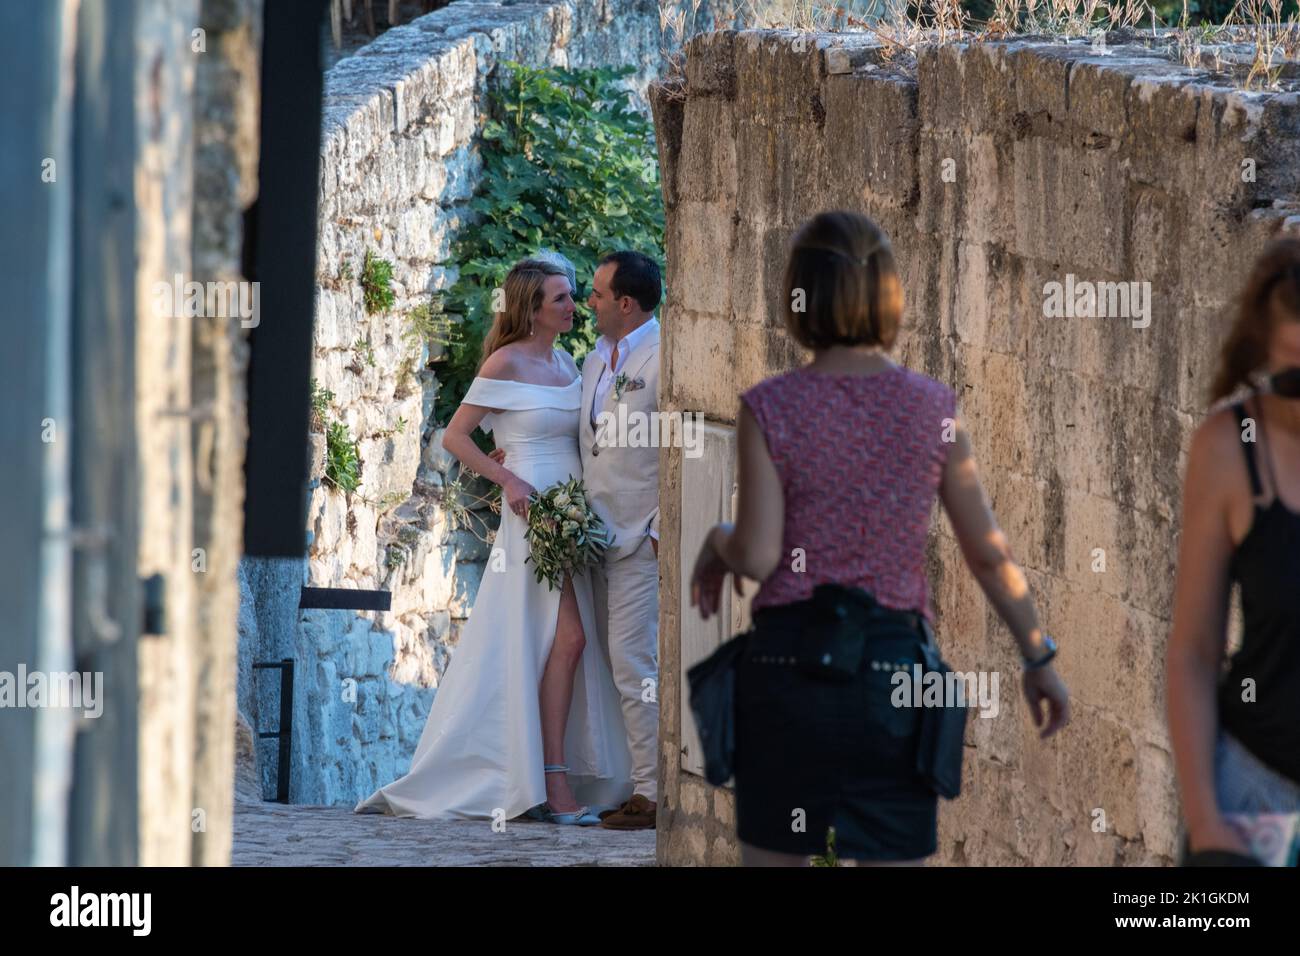 A couple pose for photos at their wedding in Les Baux-de-Provence in the South of France. Stock Photo